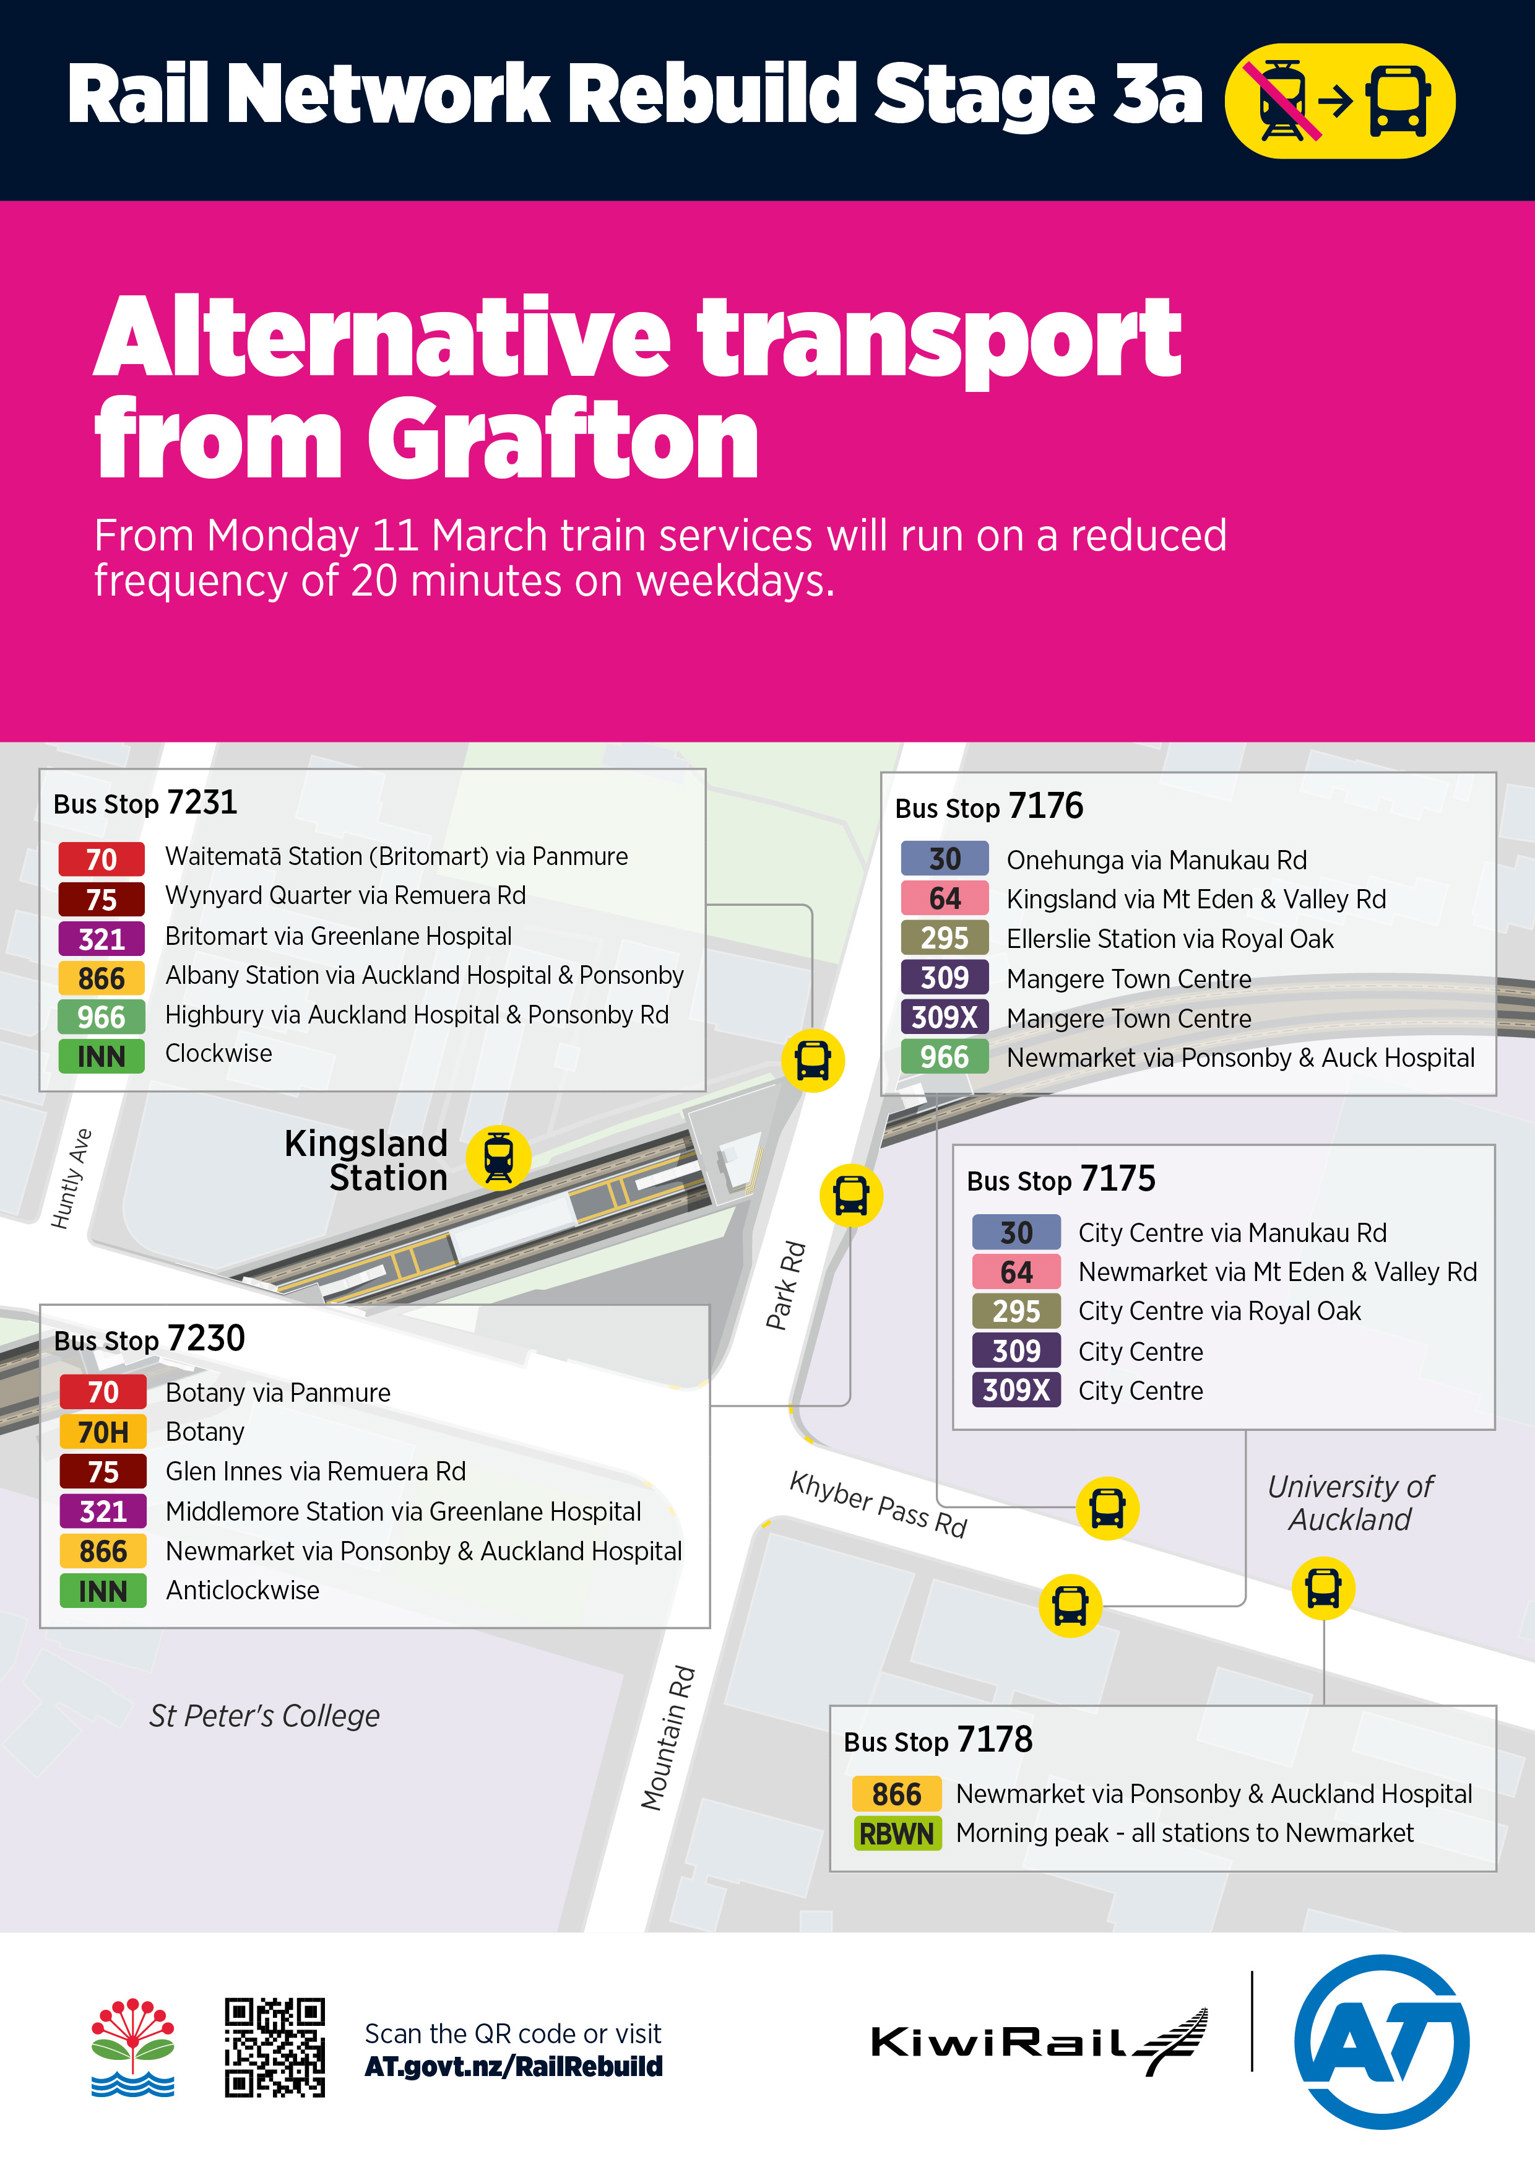 Poster showing alternative transport options from Grafton Station during Stage 3 of the Rail Network Rebuild